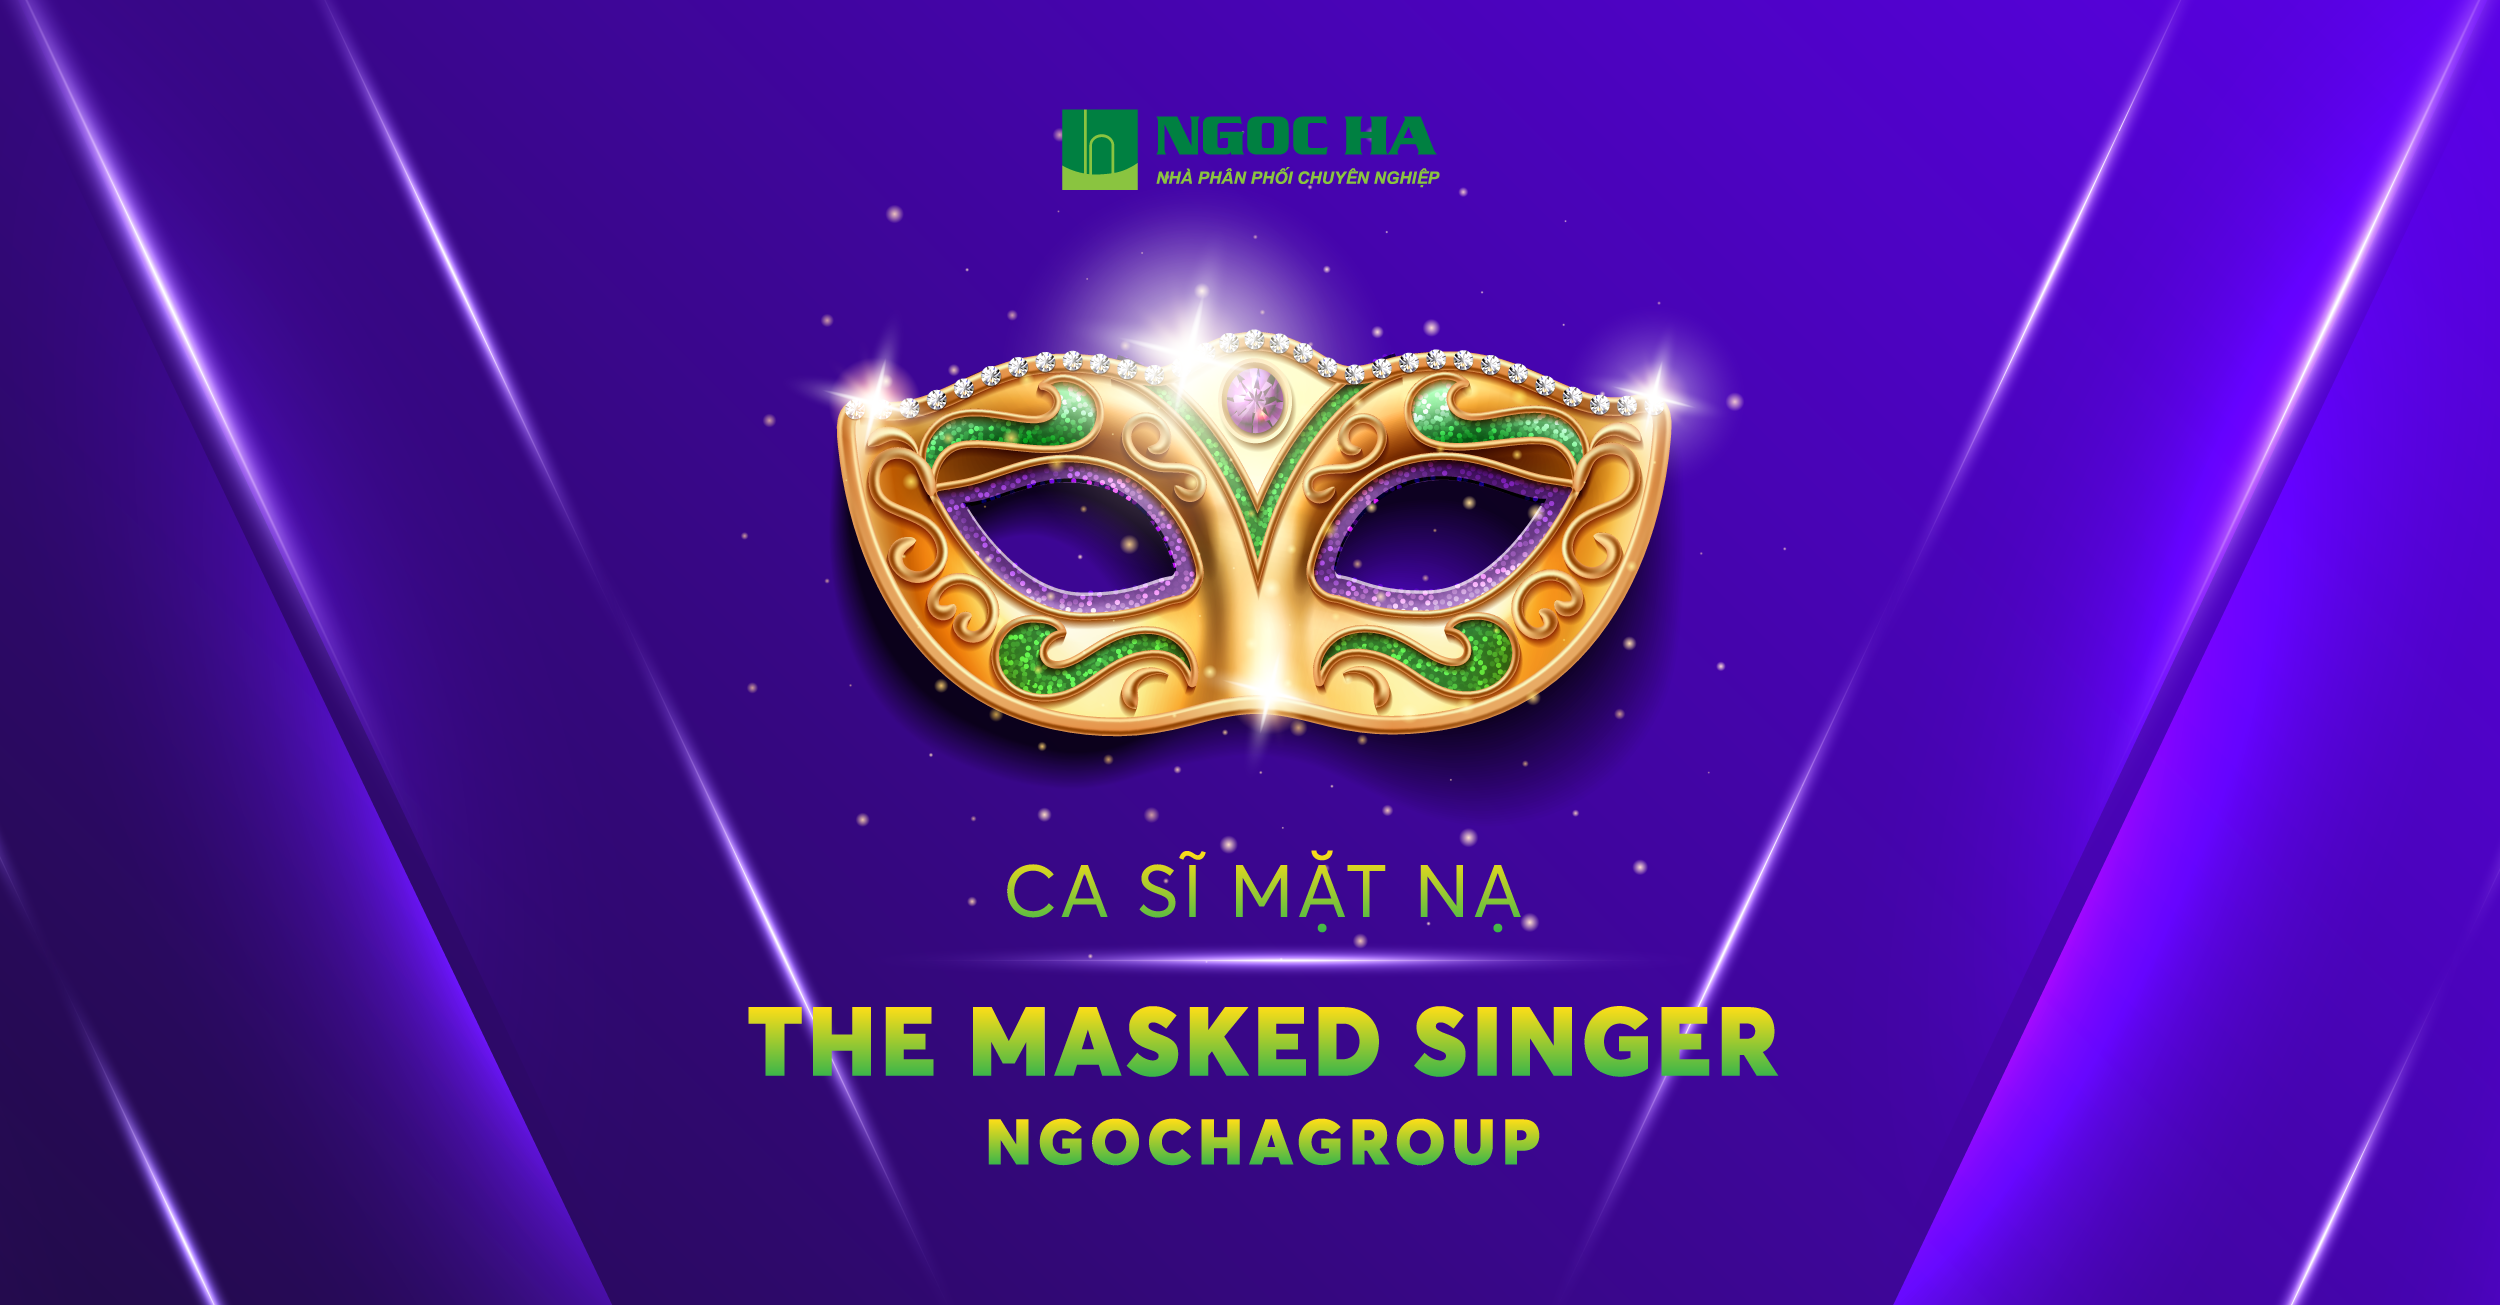 THE MASKED SINGER NGỌC HÀ GROUP